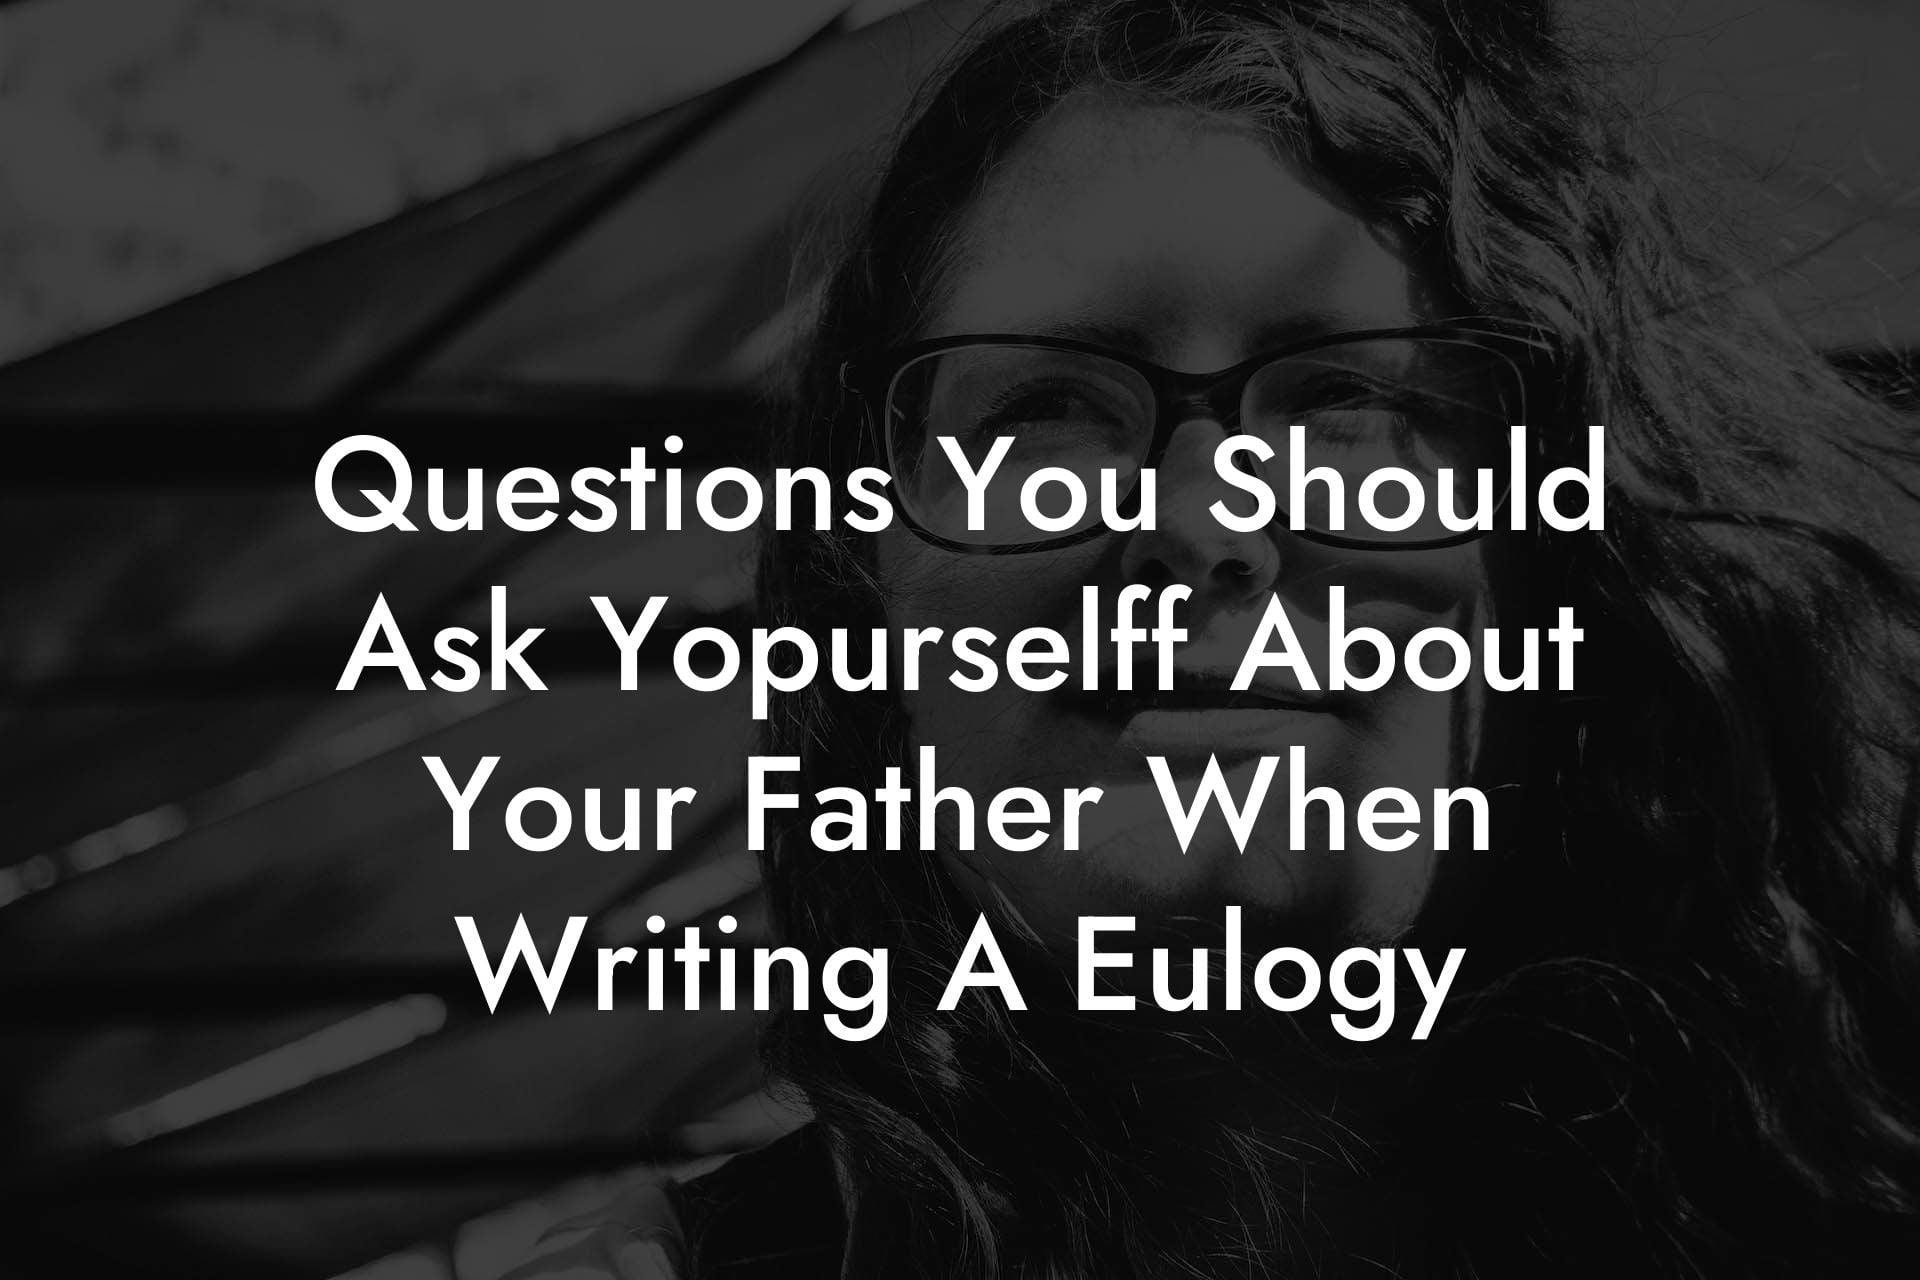 Questions You Should Ask Yopurselff About Your Father When Writing A Eulogy